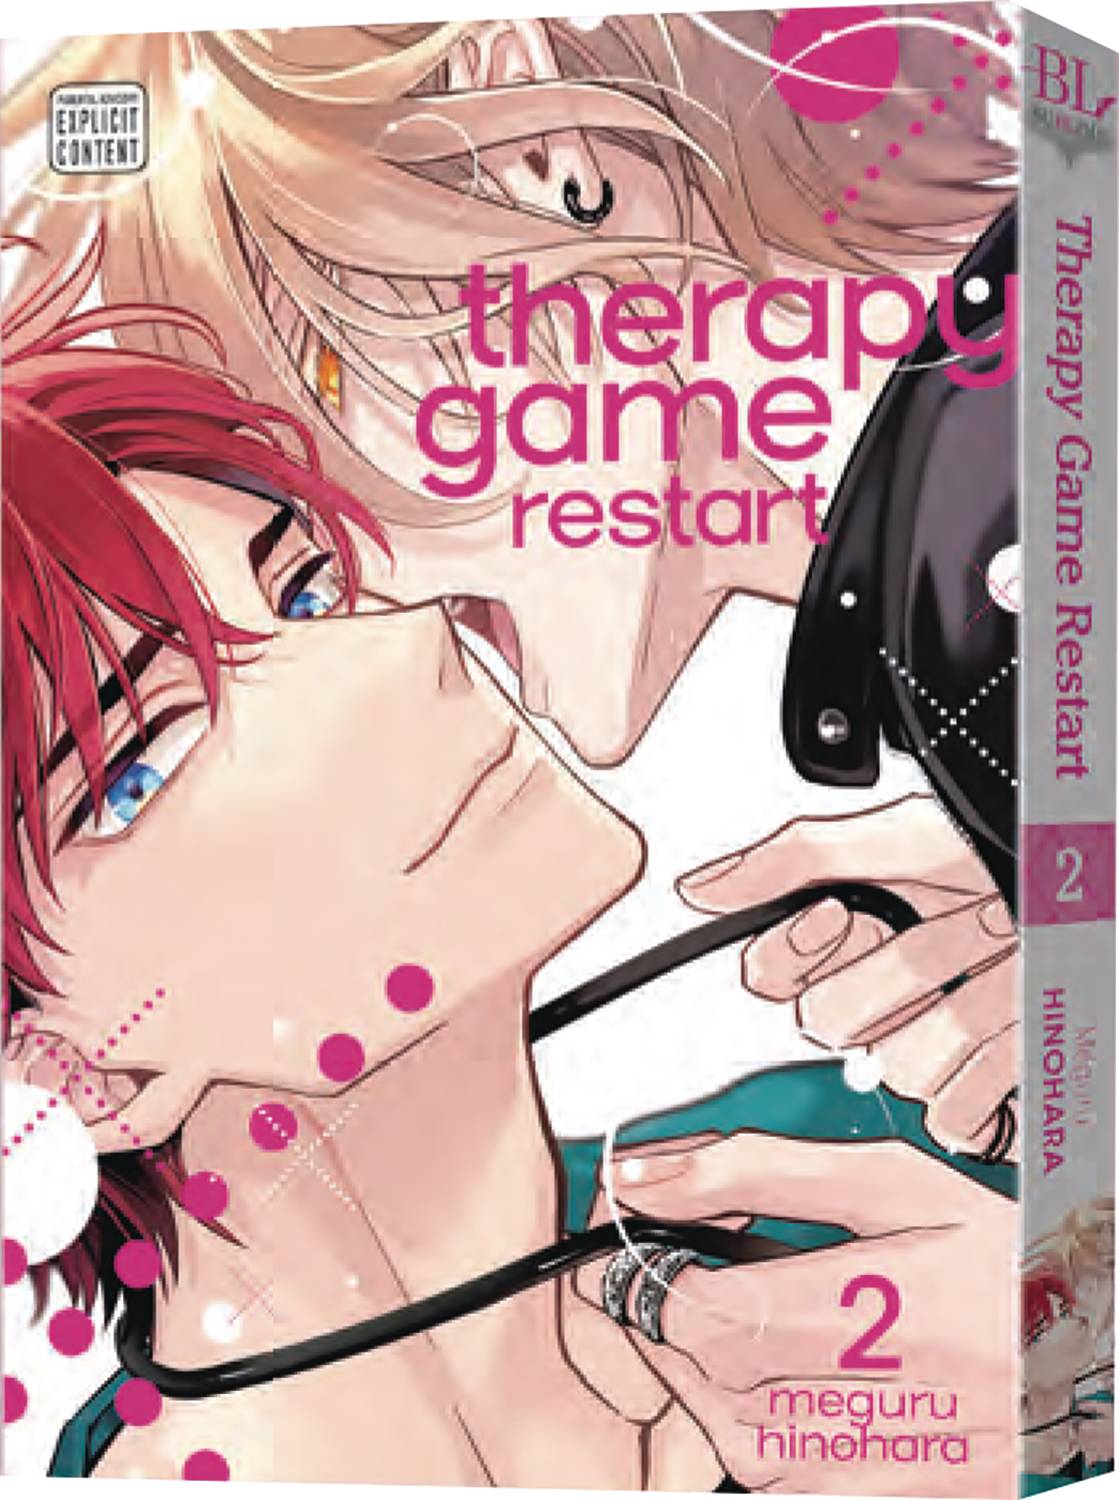 THERAPY GAME RESTART GN VOL 02 (MR)